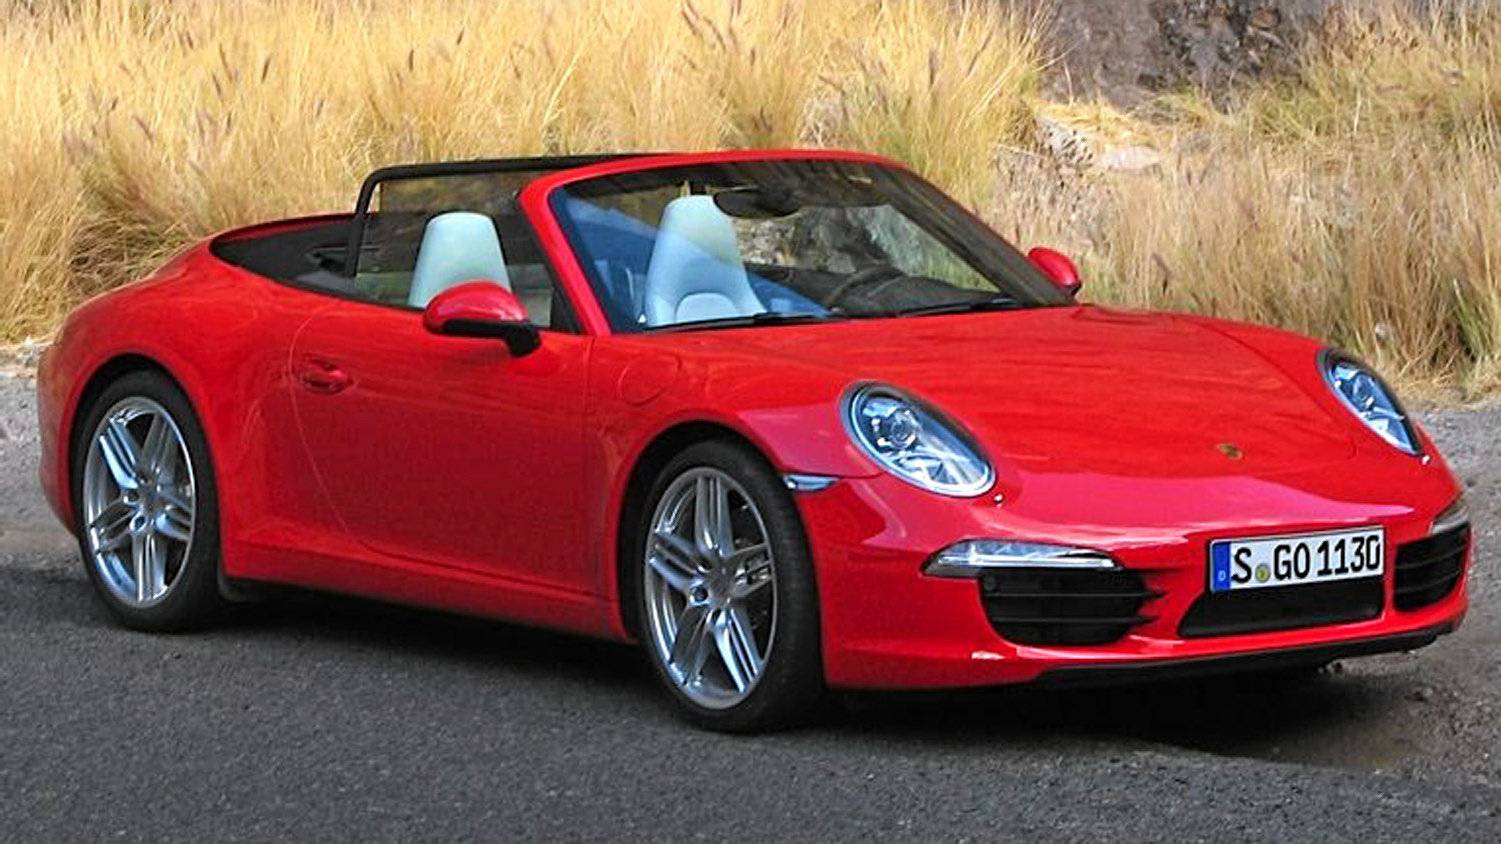 Review: Porsche 911 Carrera Cabriolet: Life's a beach - The Globe and Mail